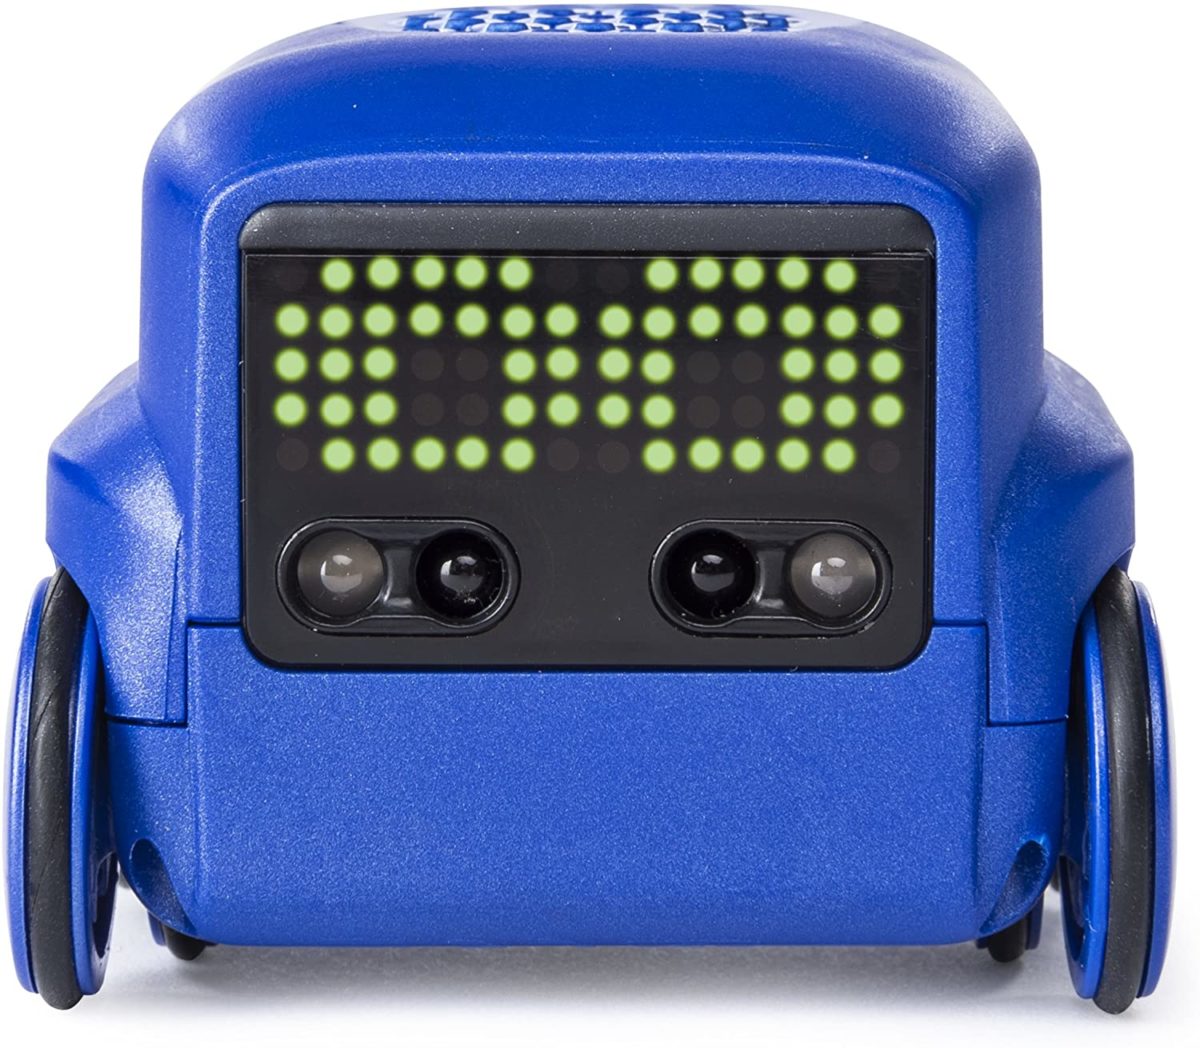 35 tech items your kids need to make their new year bright